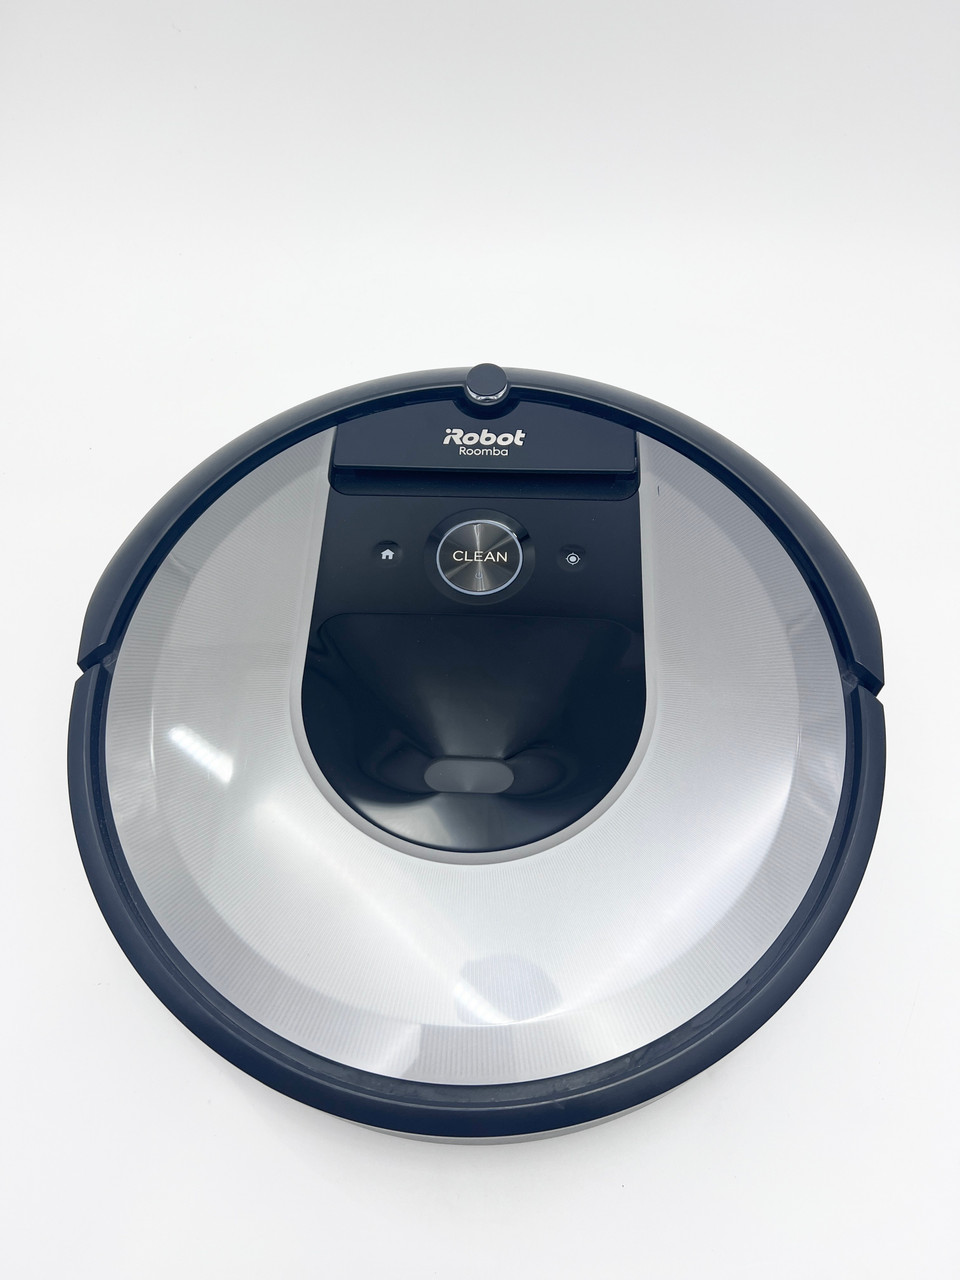 irobot Roomba Combo i8+ (i8576) 2-in-1 Robot Vacuum Cleaner and Washer  Connected WiFi, Self-Emptying System - 2 Rubber Brushes - Smart Mapping 